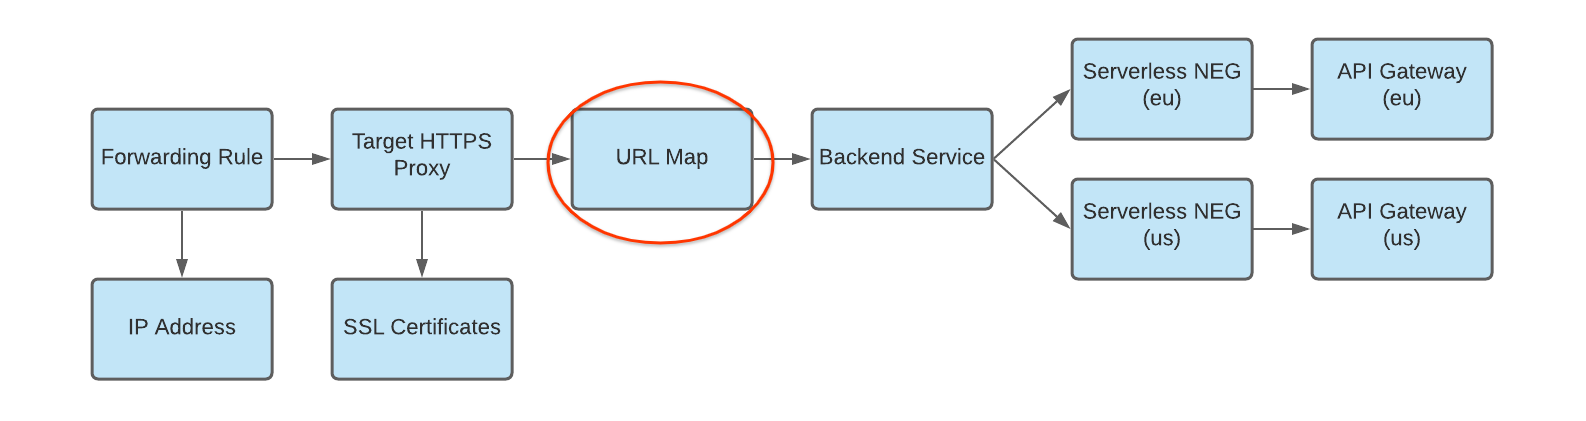 diagram of url map to backend service with multiple deployments